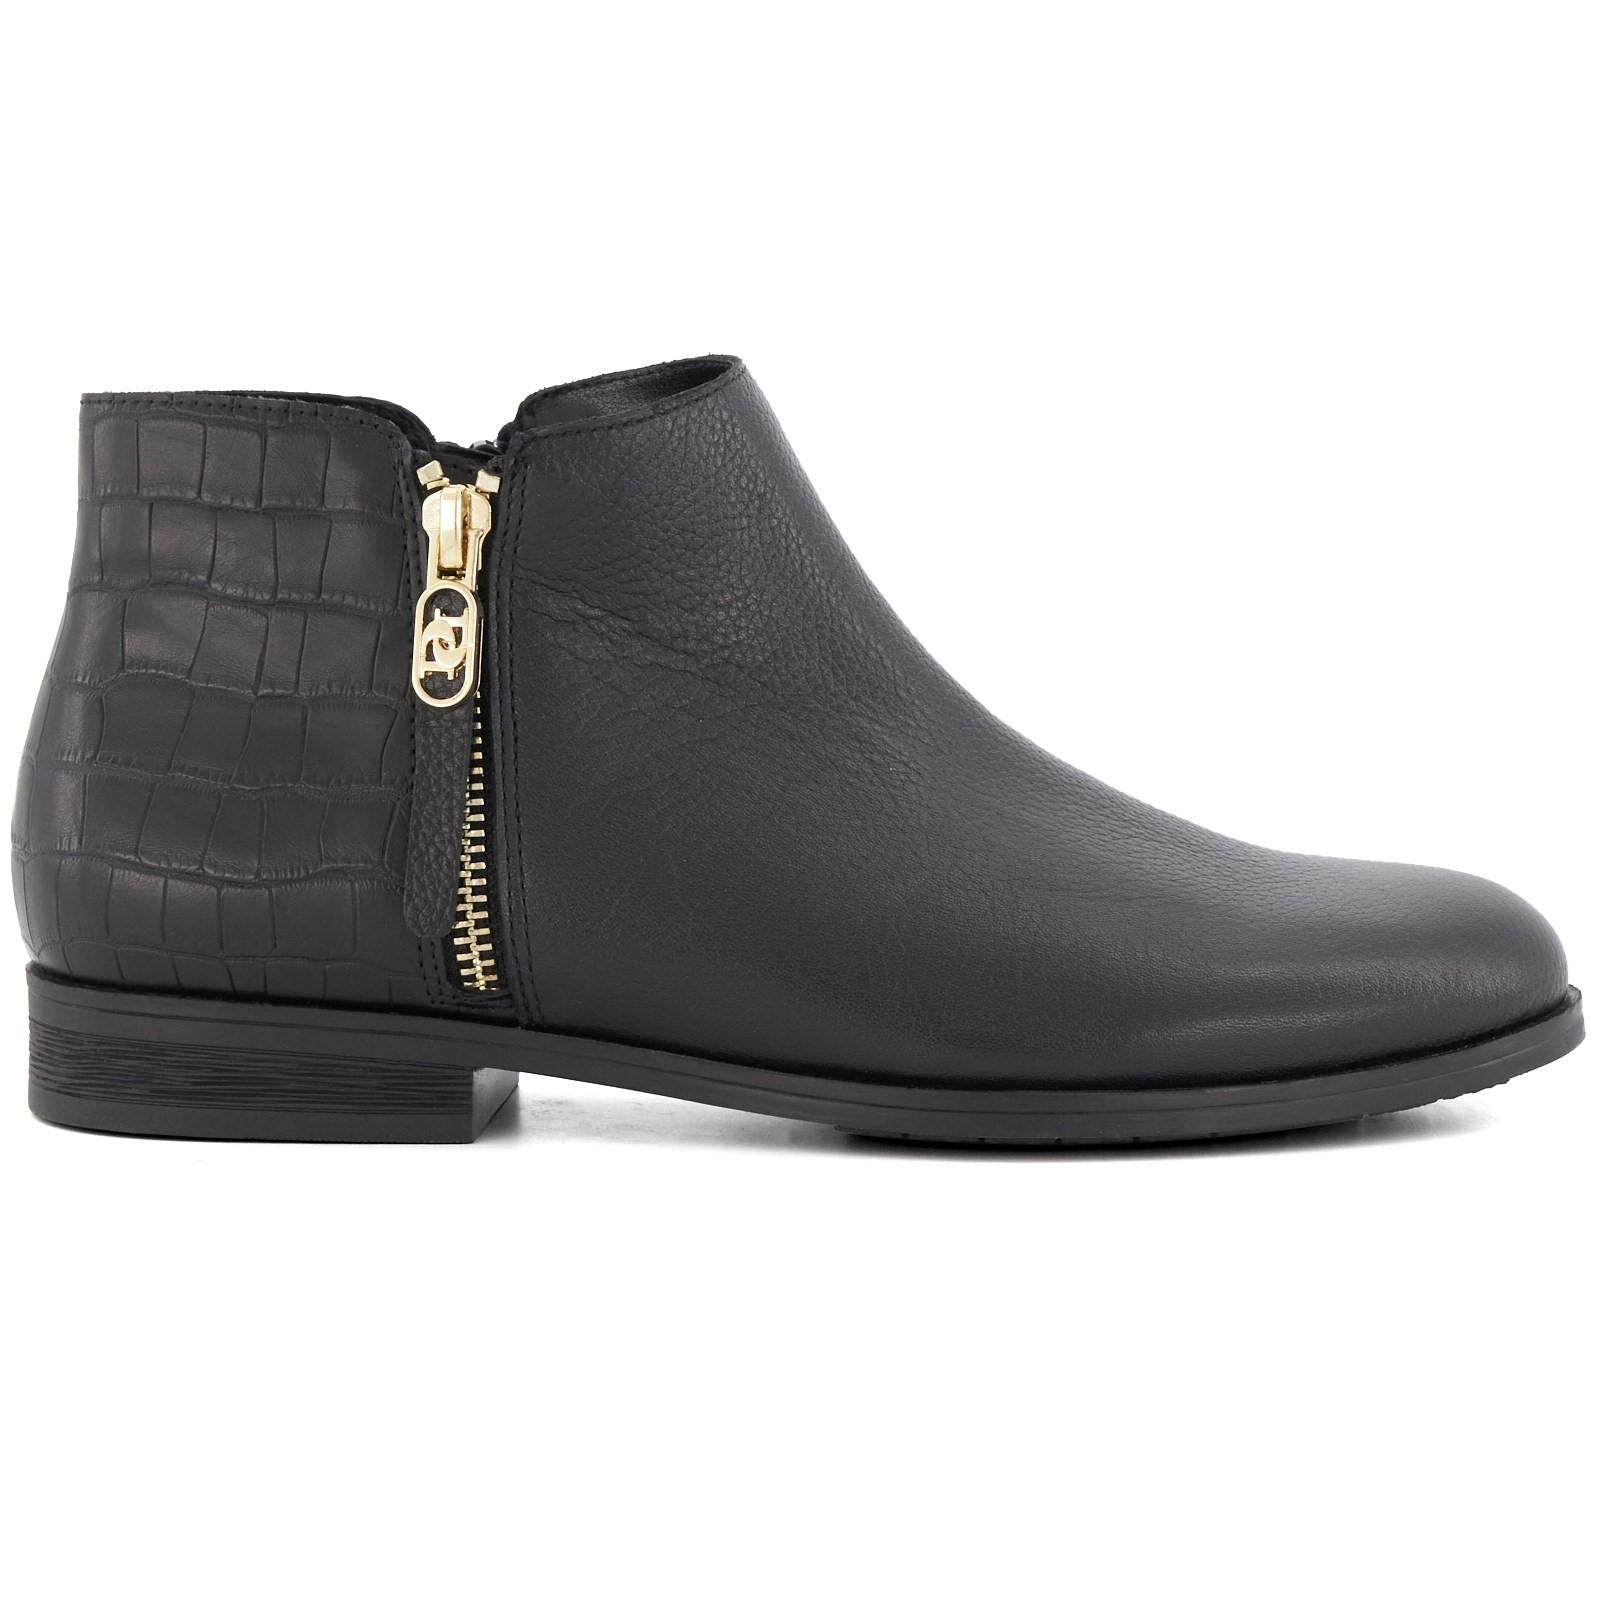 Dune London Pond Ankle Boot